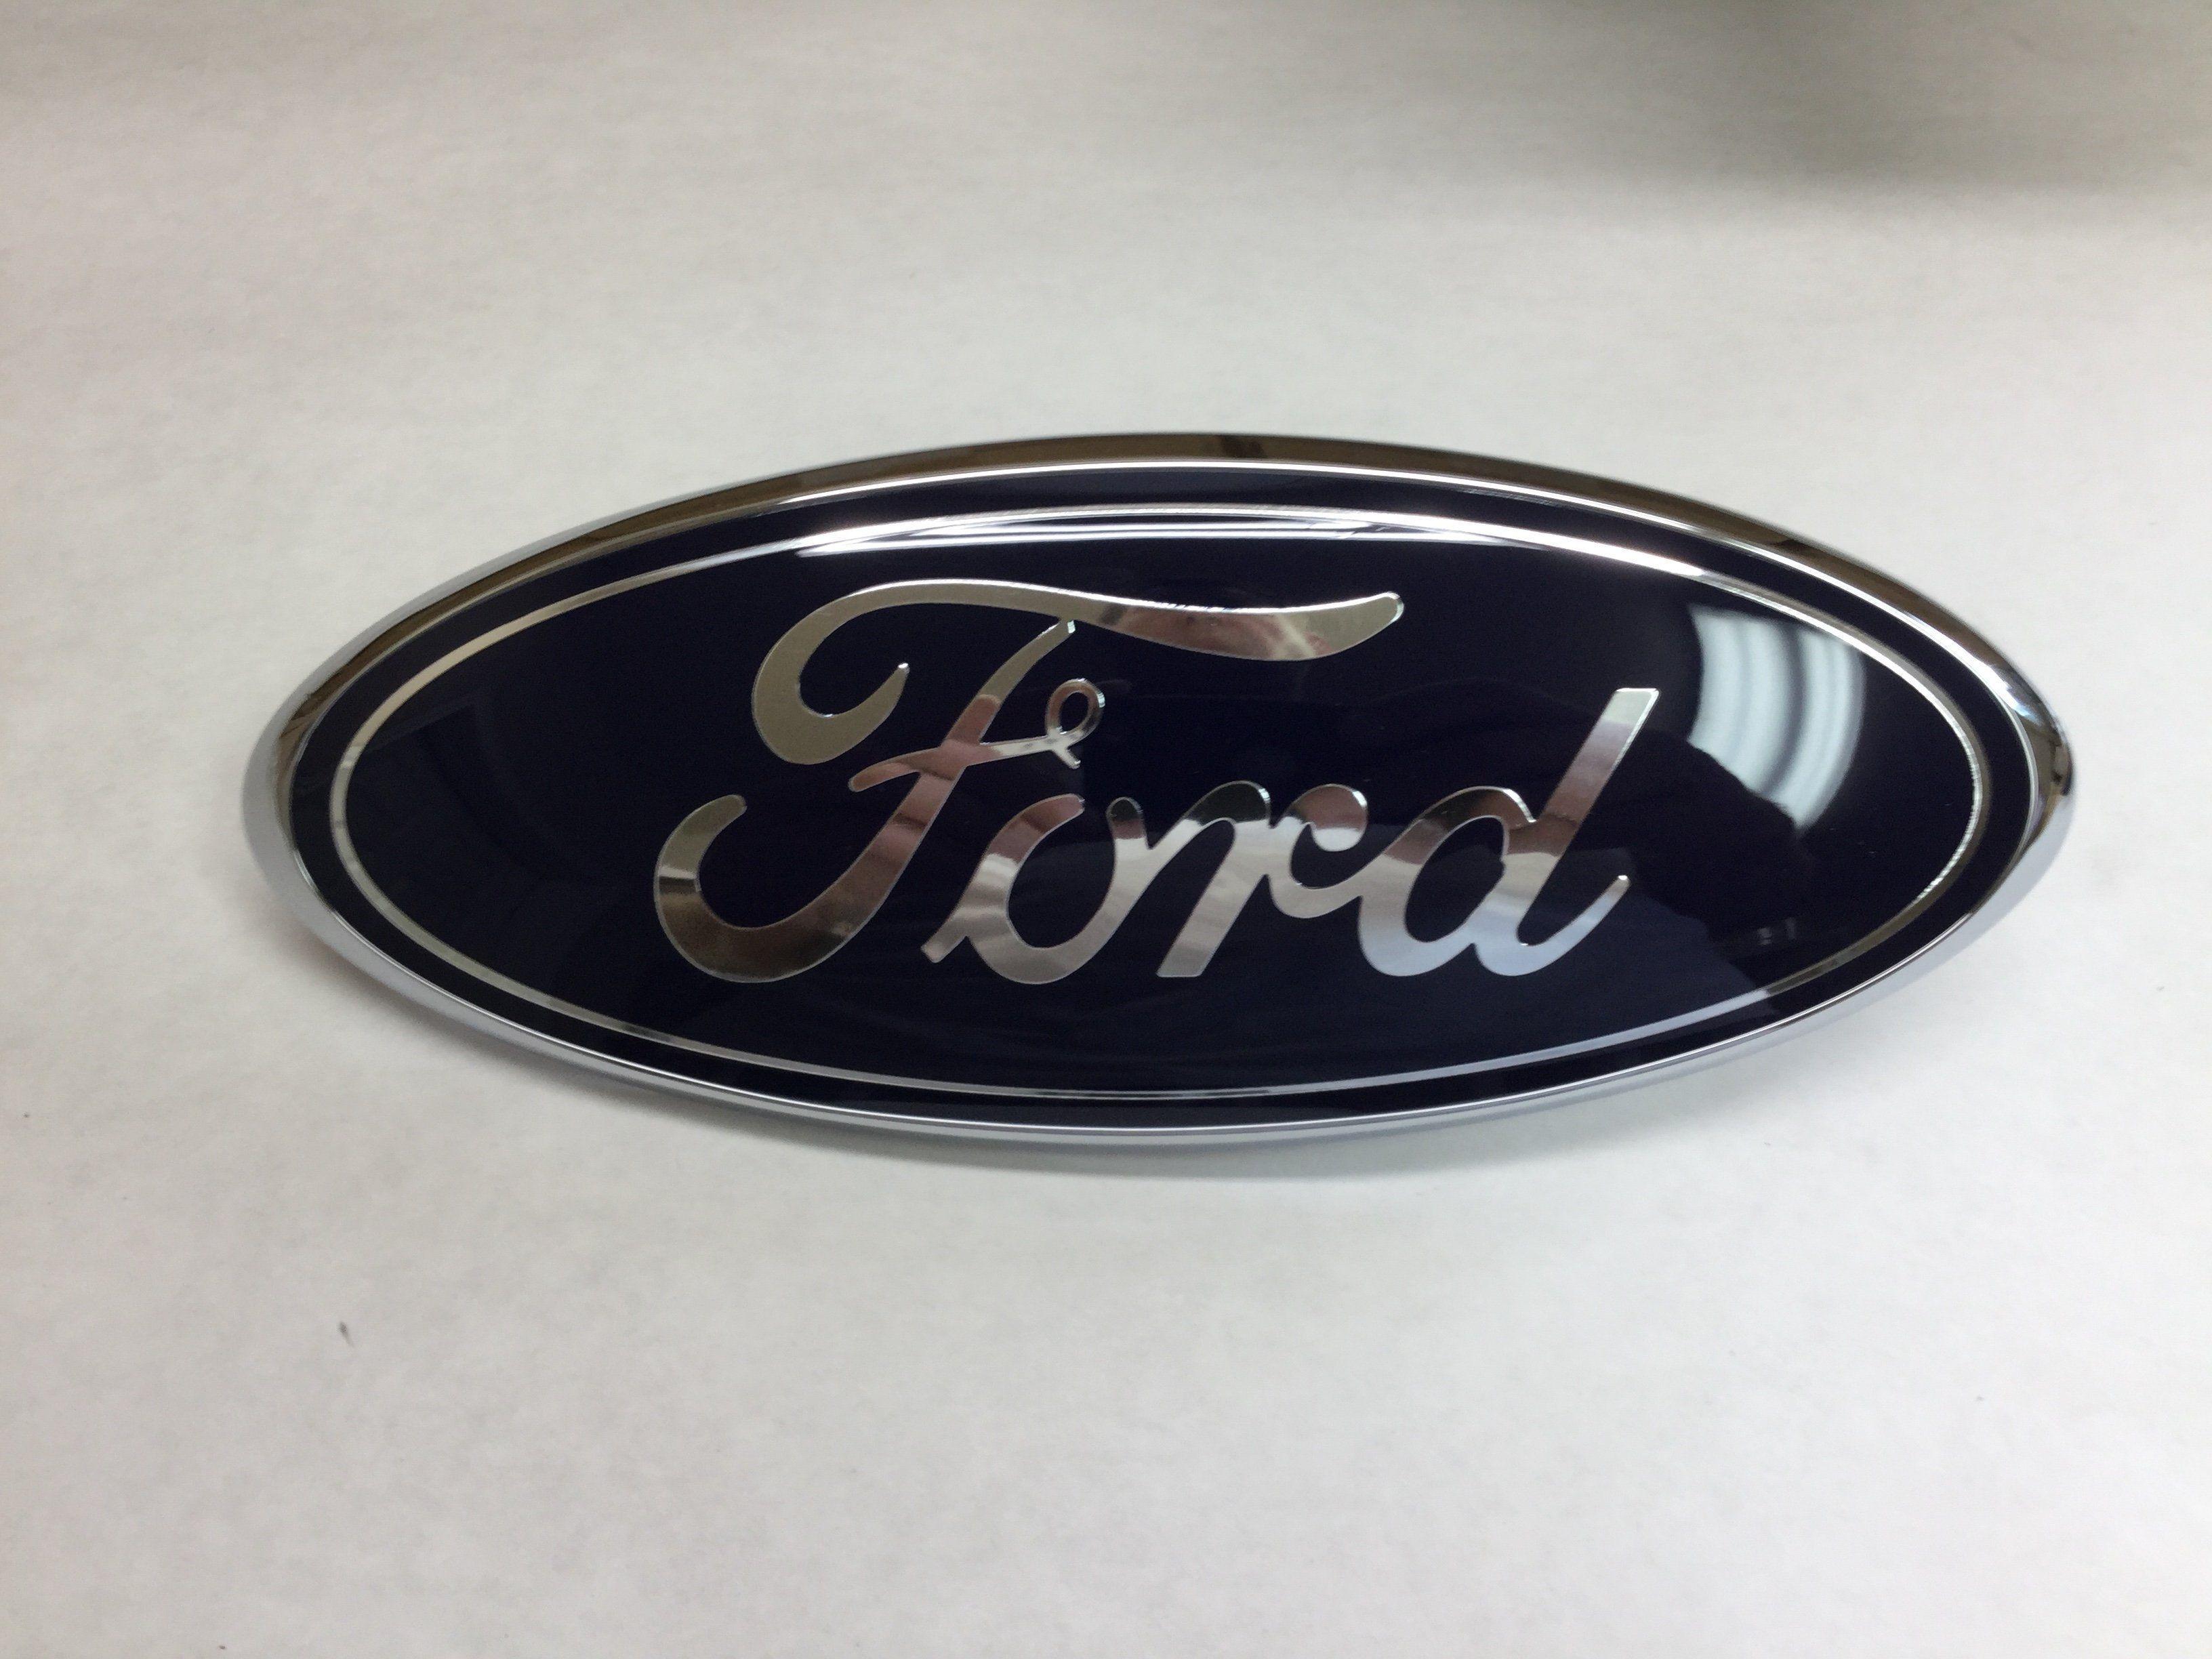 F-350 Logo - New 2005-2007 Ford F-250 F-350 Super Duty Grille Emblem Blue Oval Genuine  Part Number 5C3Z-8213-AB-B32 lowest prices, Fast Shipping and 3 year ...